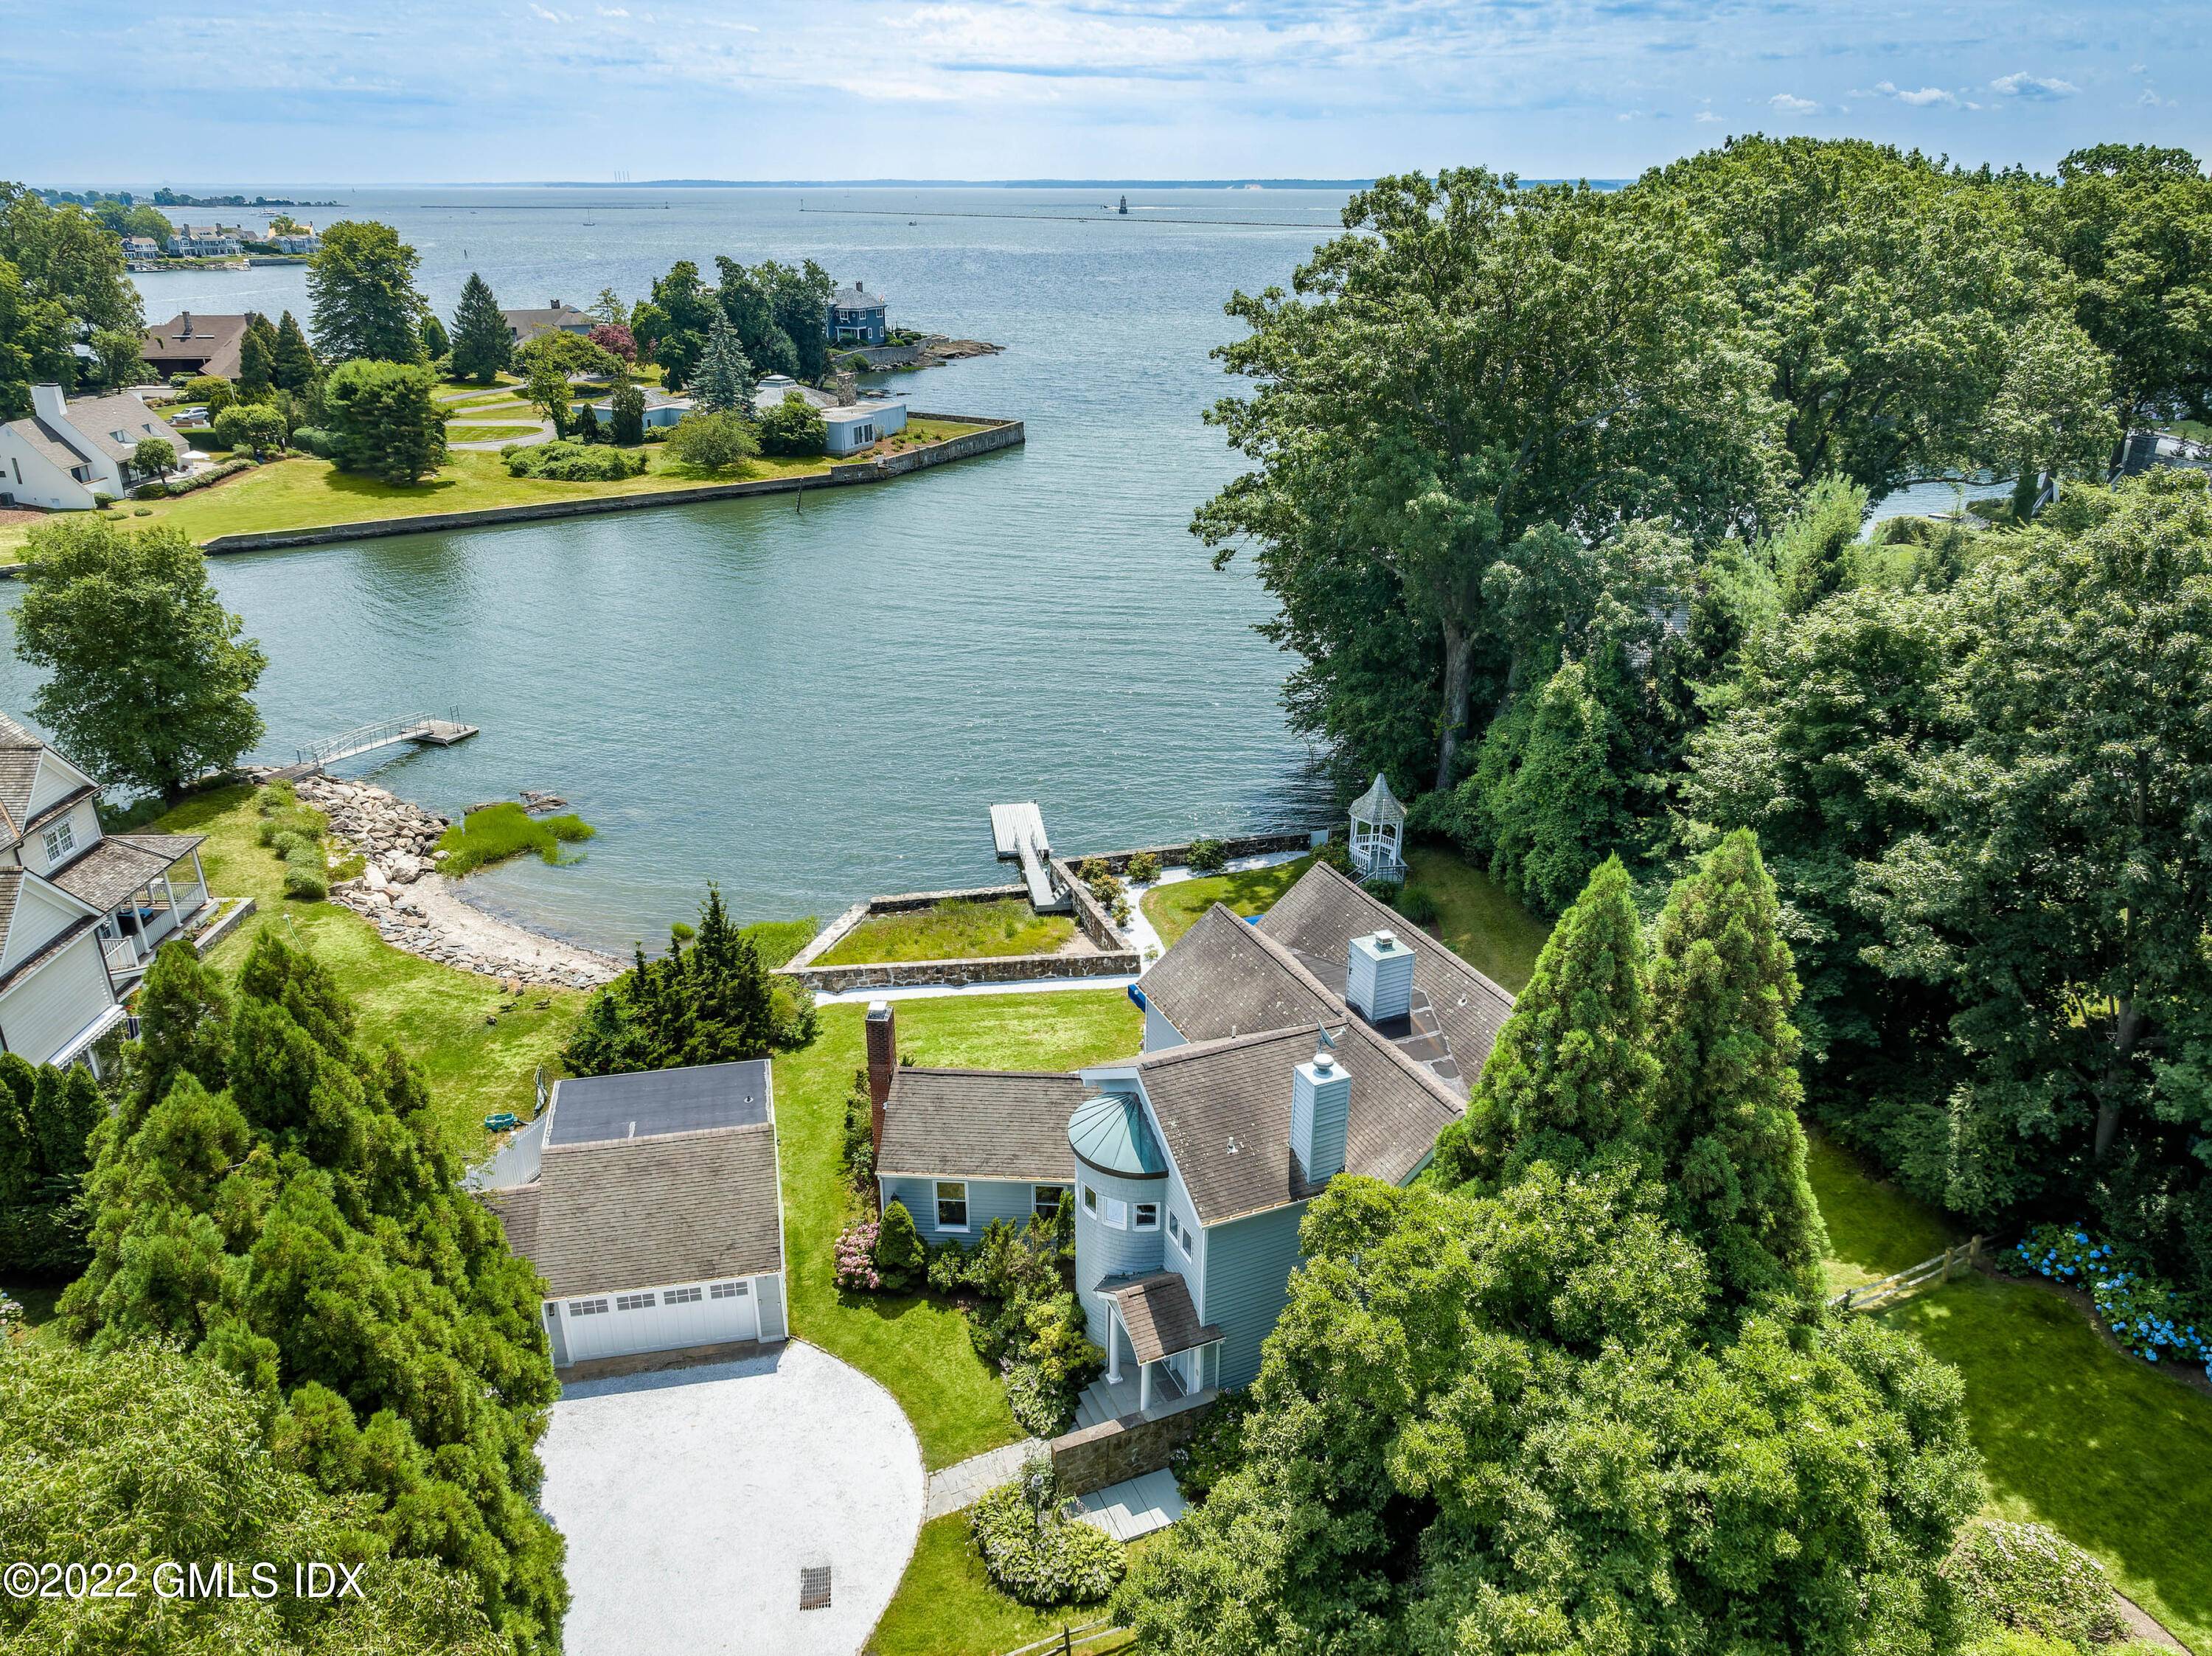 CHIC DIRECT WATERFRONT IN OLD GREENWICH Idyllic location with breathtaking views LI Sound picturesque lighthouse.